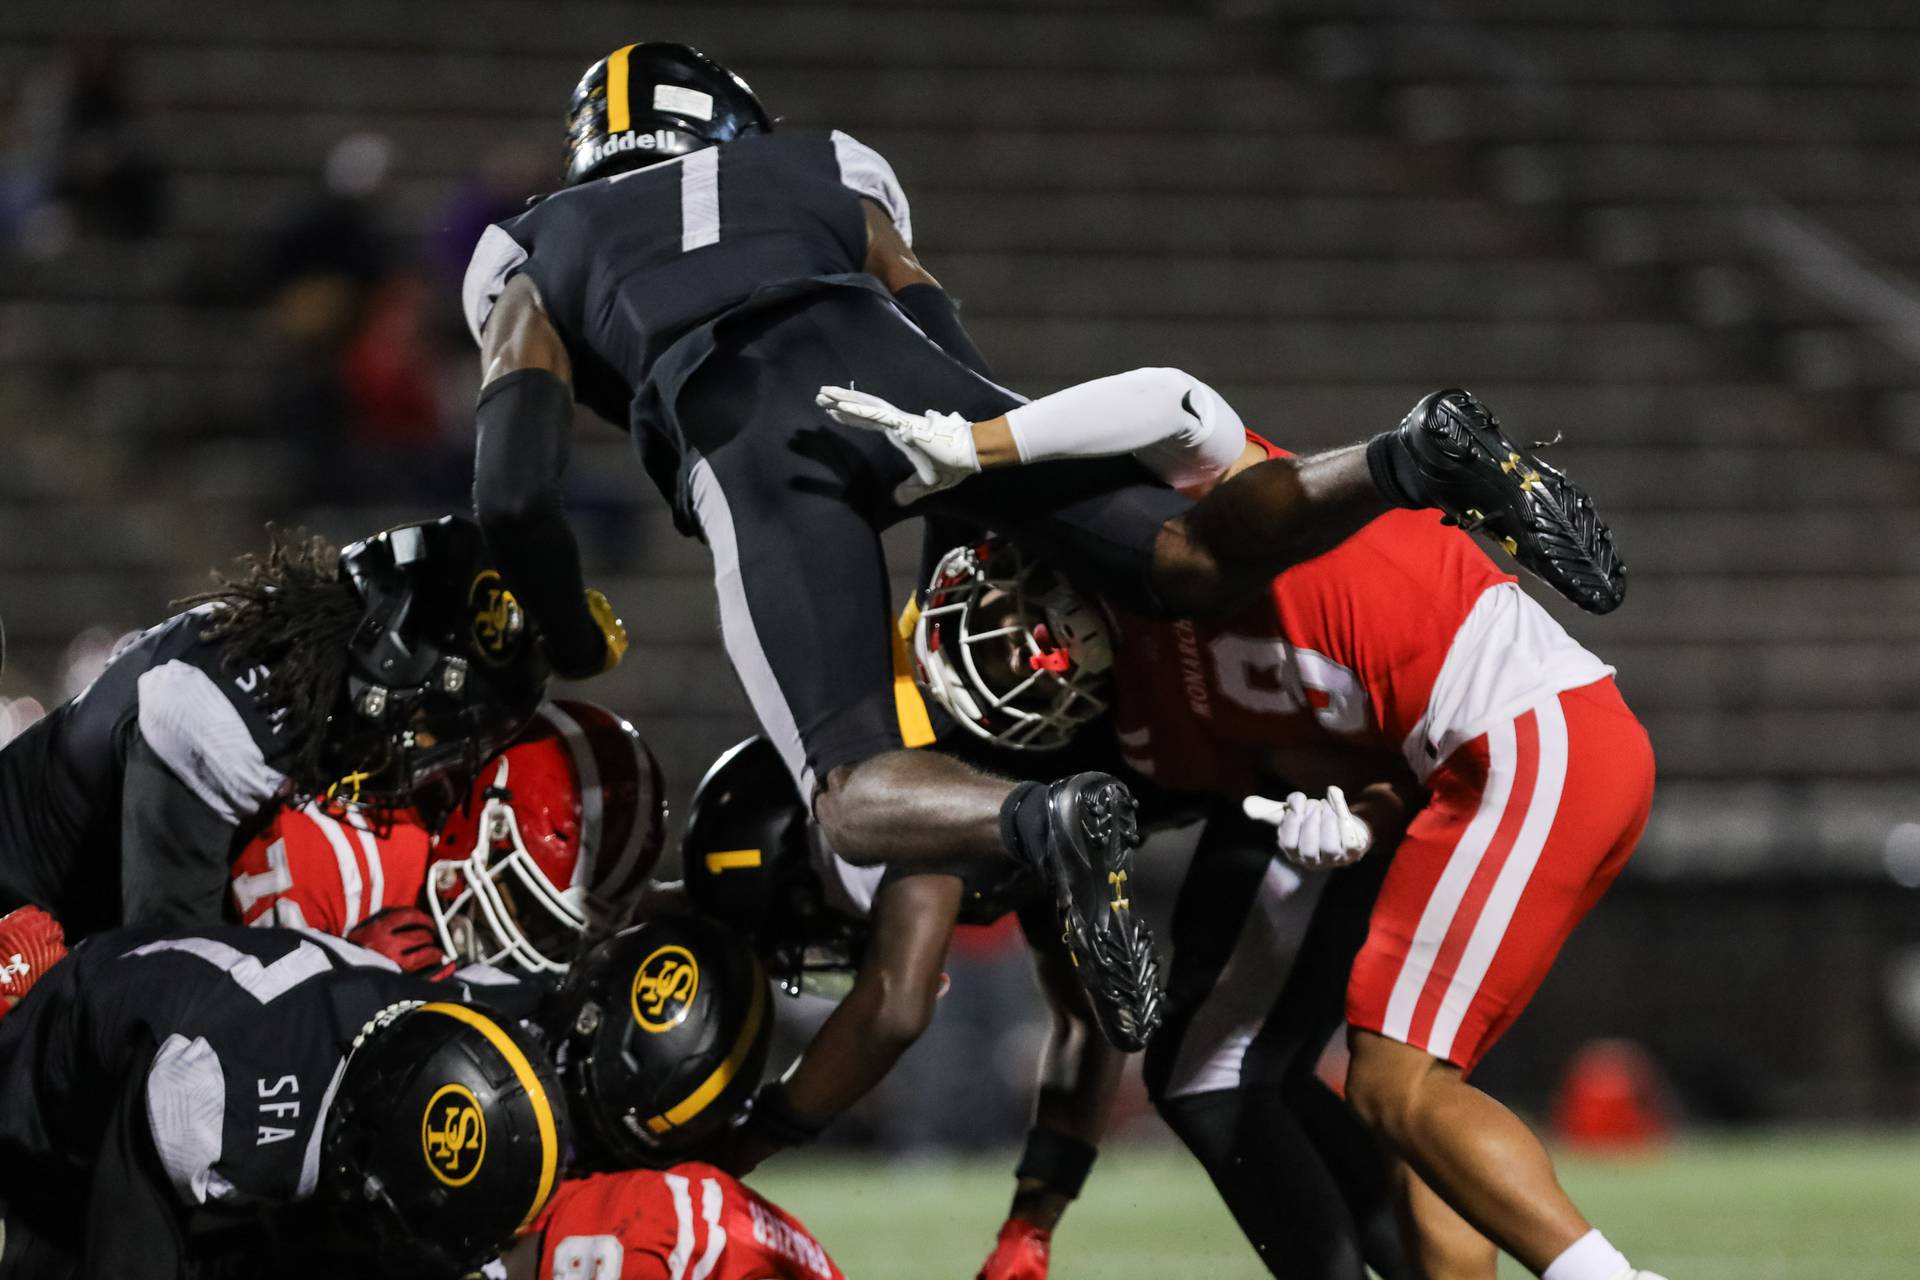 BB-SP-St. Frances-Mater Dei St Frances Quarterback, Ify Obidegwu #7, jumping over Mater Dei's players to defend his teammates.